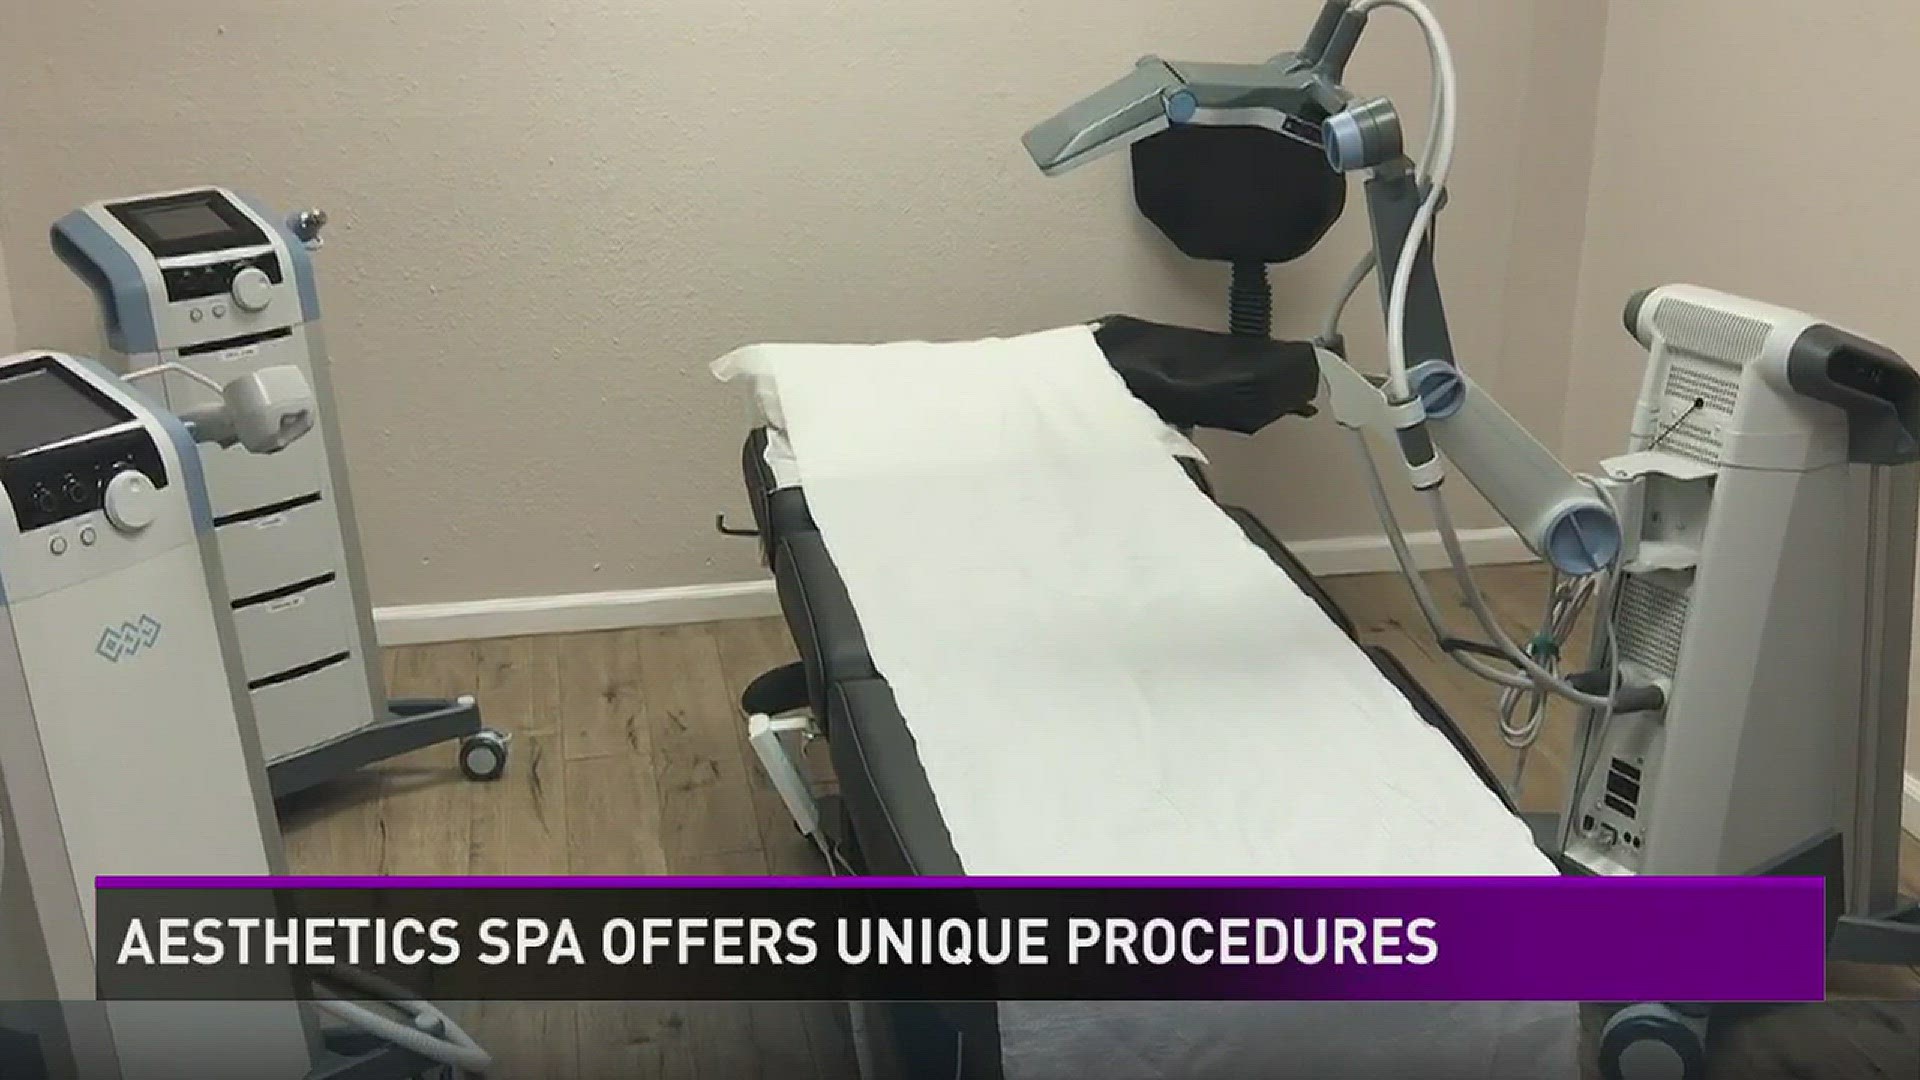 If you're looking to drop a couple of dress sizes, you no longer have to drive to Houston to get the highest quality treatments. One local medical spa has a series of treatments with the latest Vanquish Me, Exilis Ultra, and Infini equipment for its proce